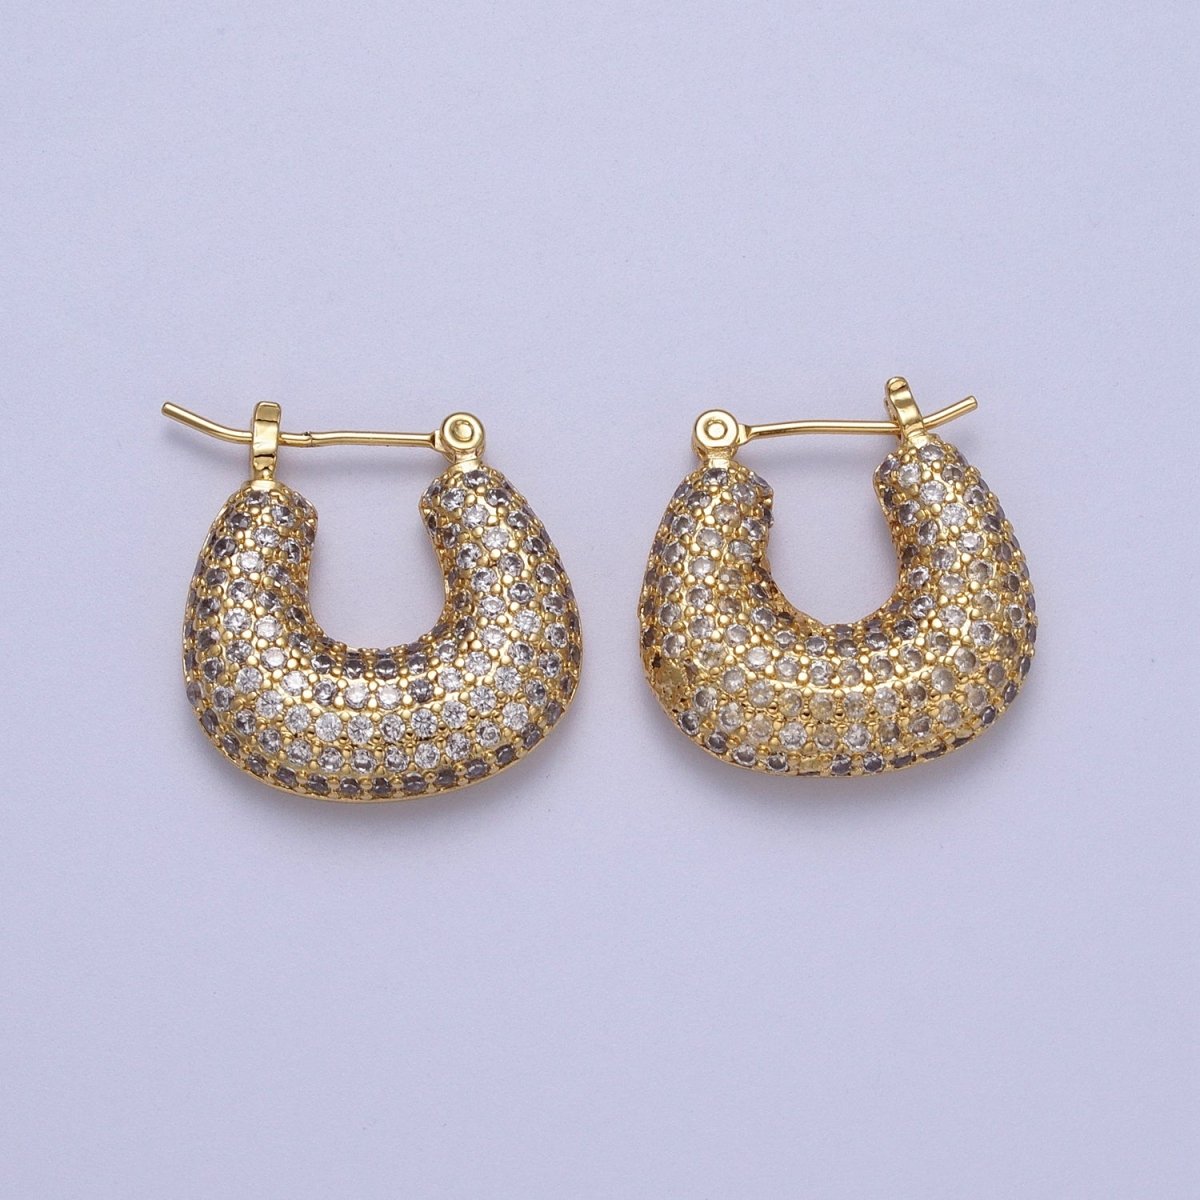 Clear Micro Paved Chubby U-Shaped Latch Earrings in Gold & Silver | AB039 AB040 - DLUXCA